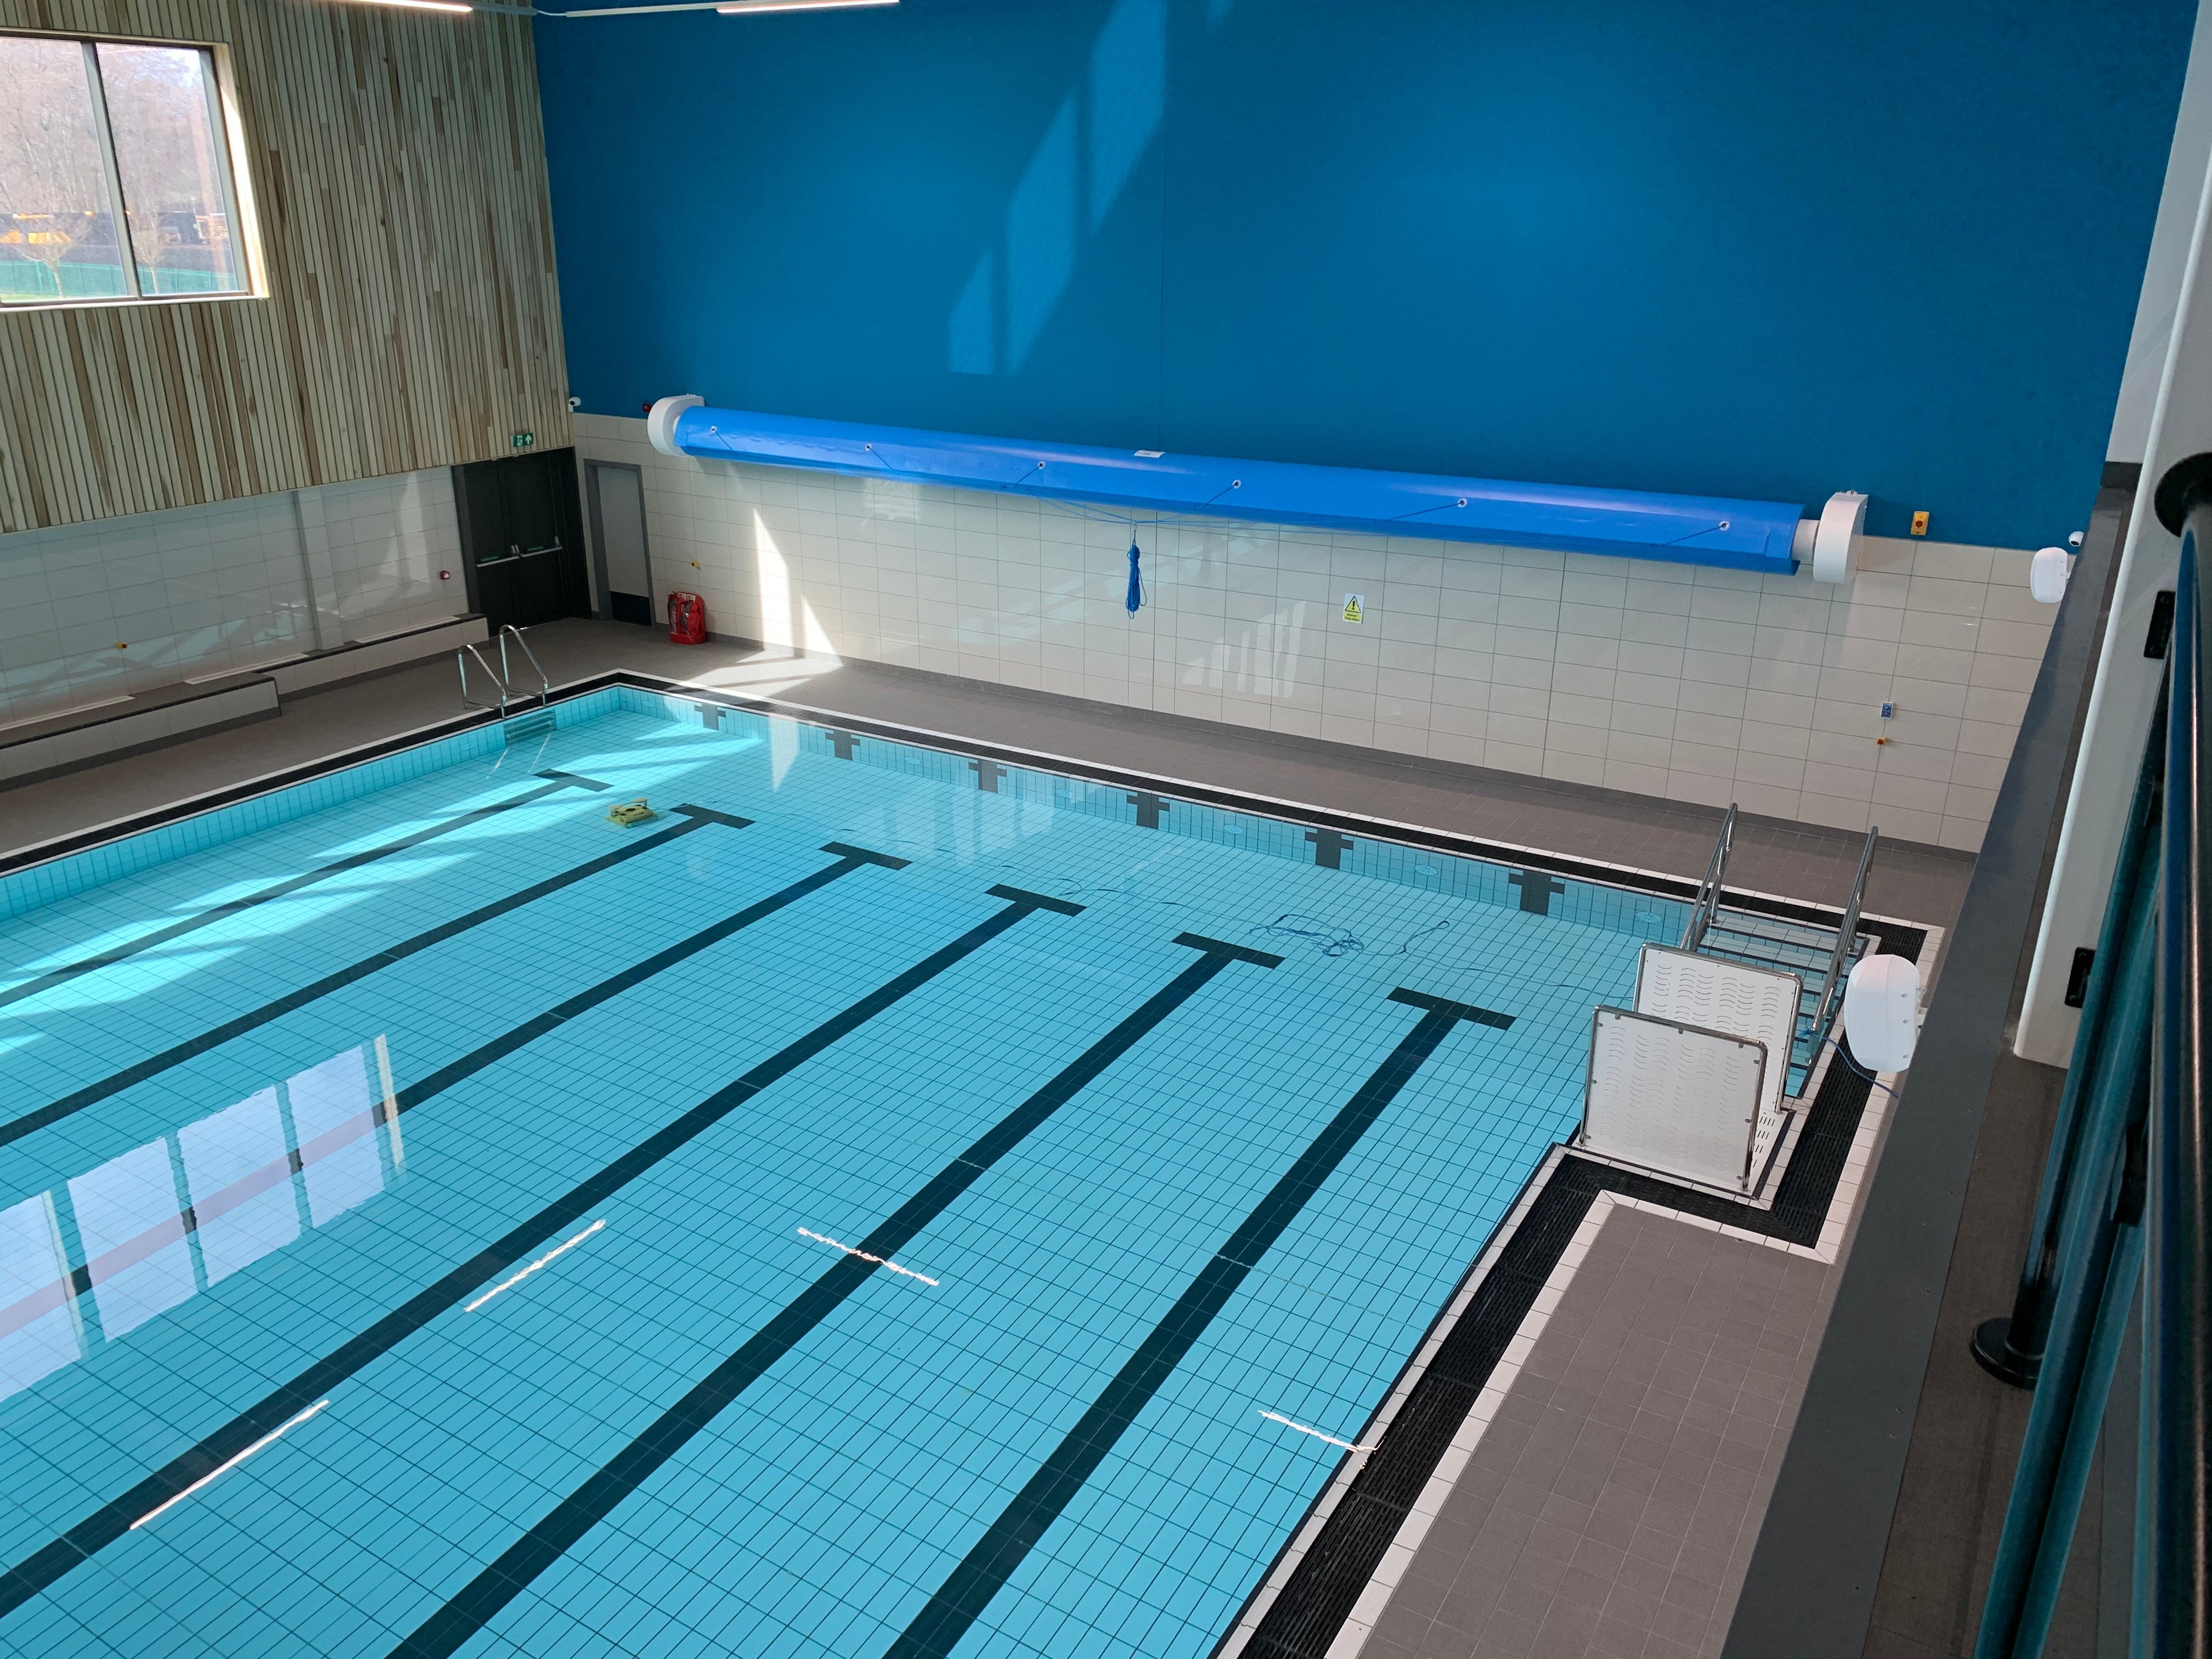 ARDEX products specified for Eastwood Leisure Centre